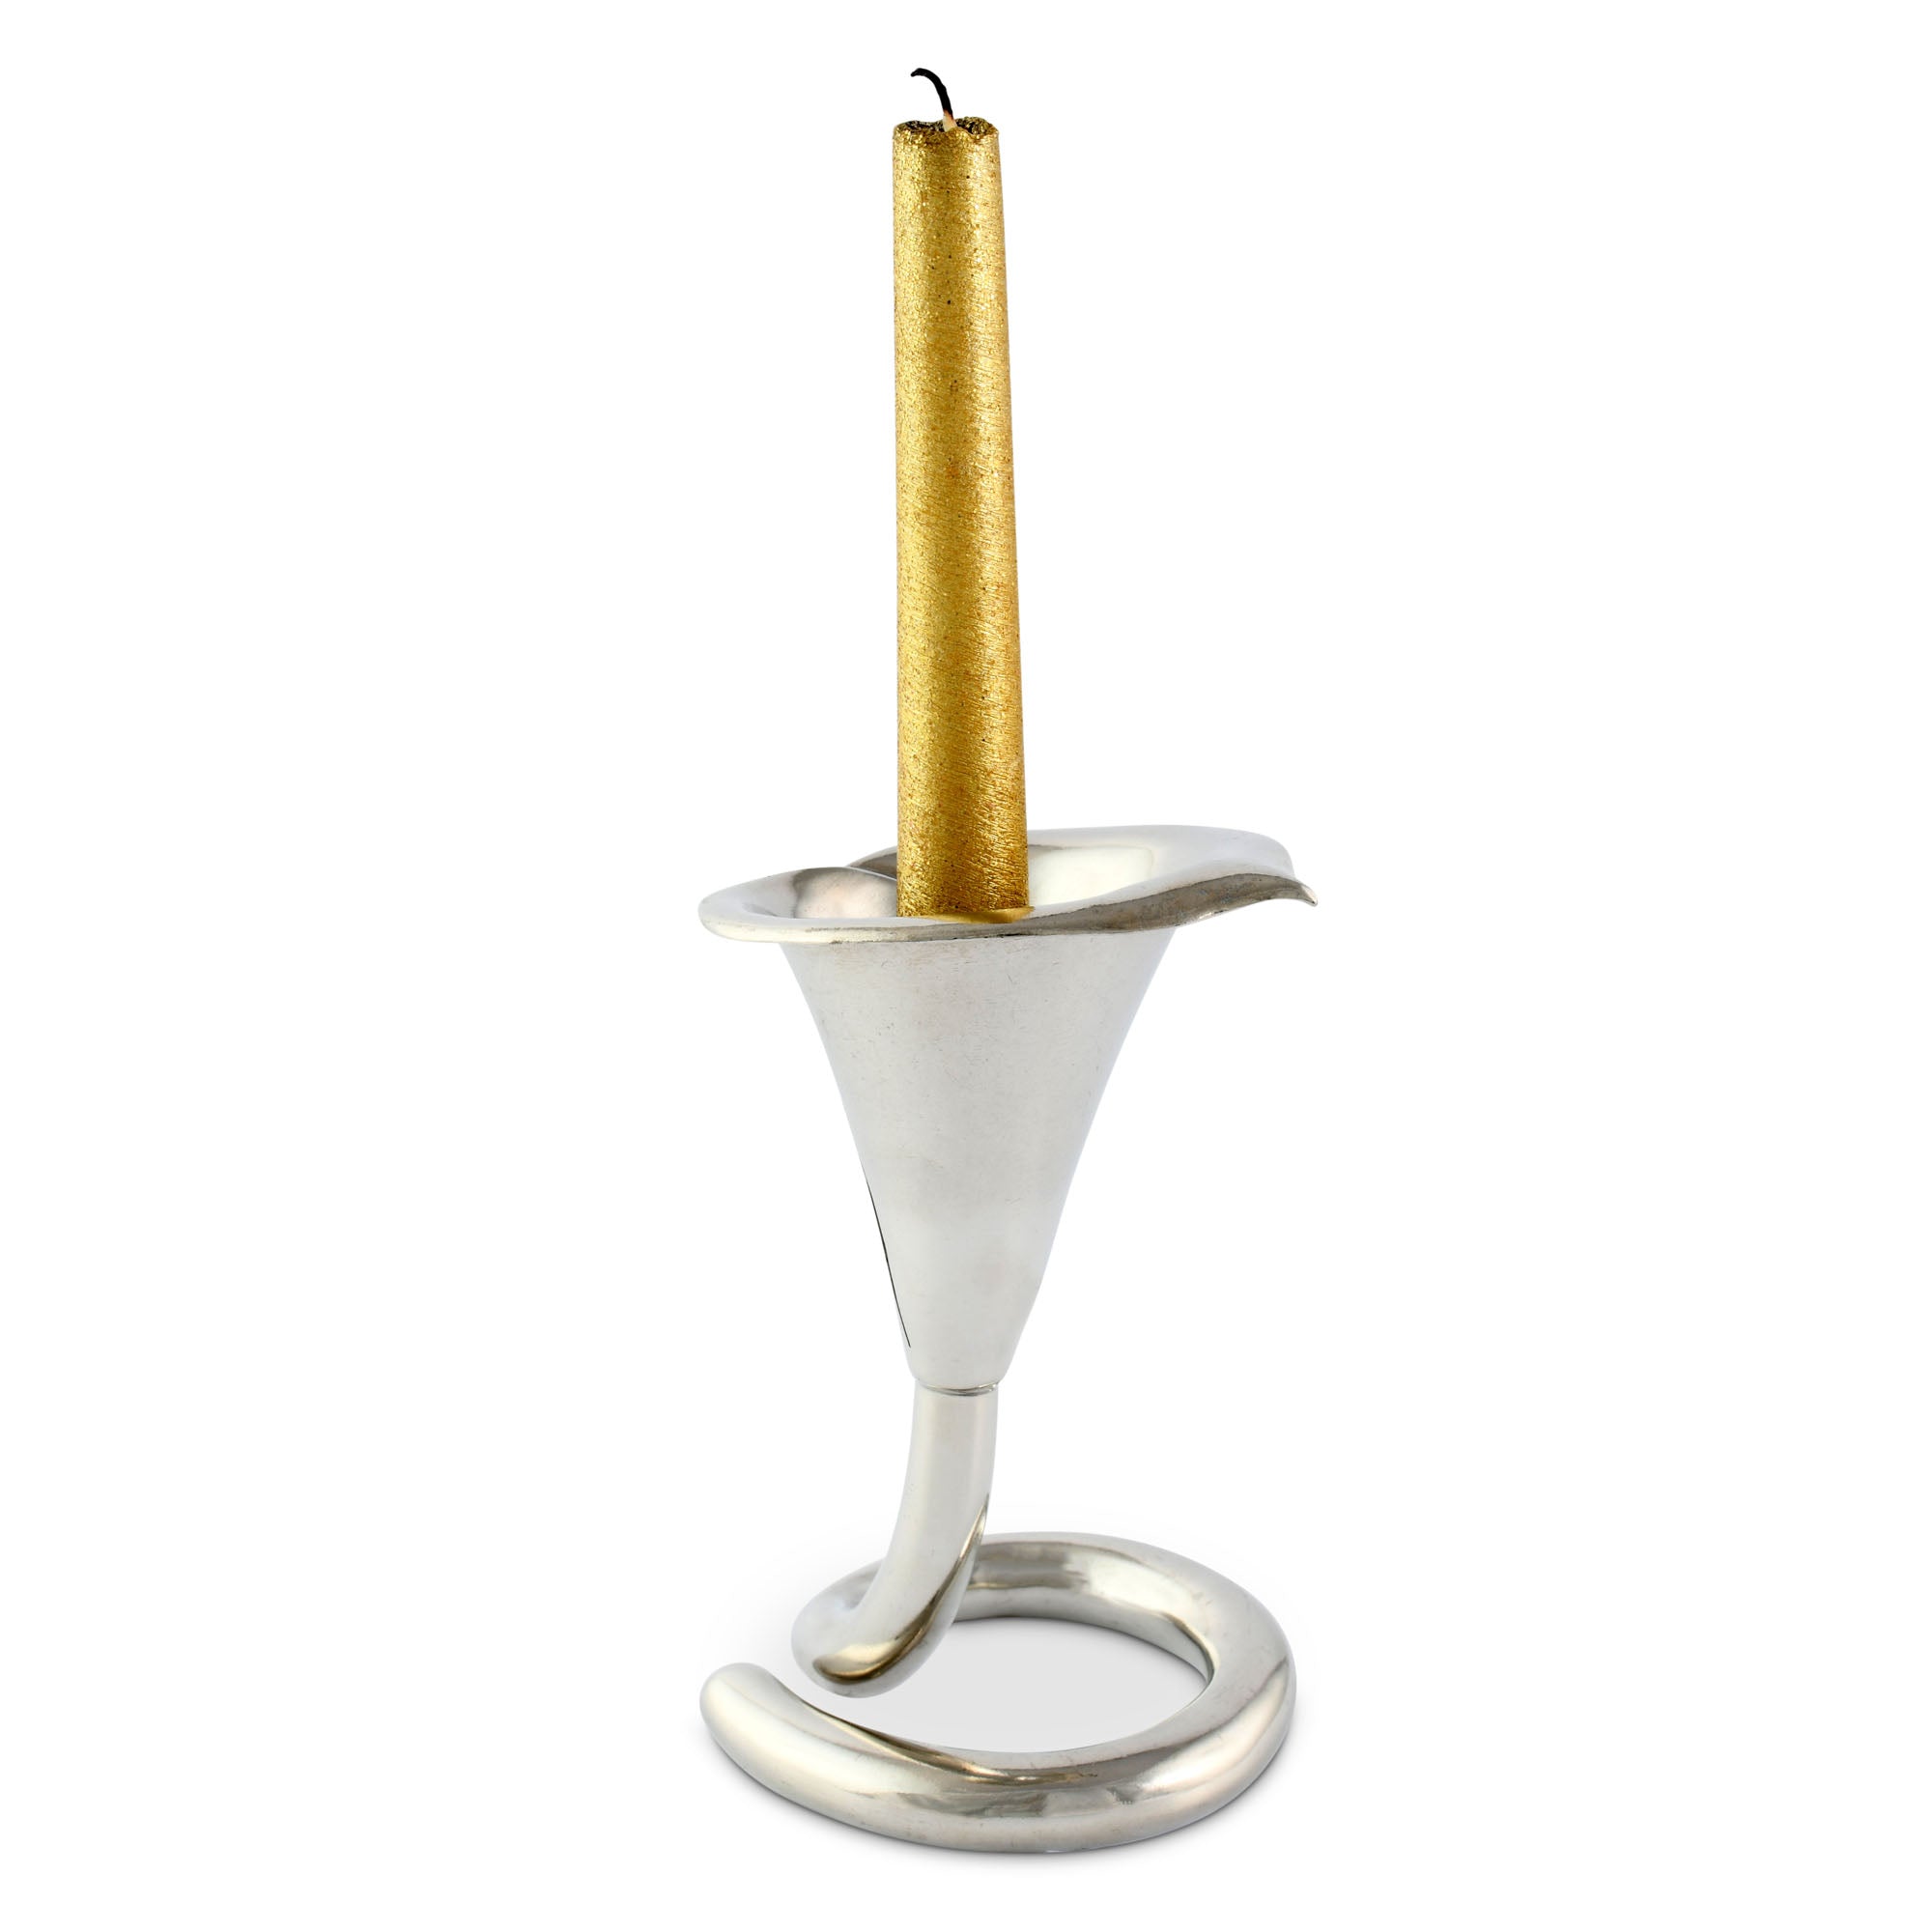 Vagabond House Lily Candlestick Short Product Image